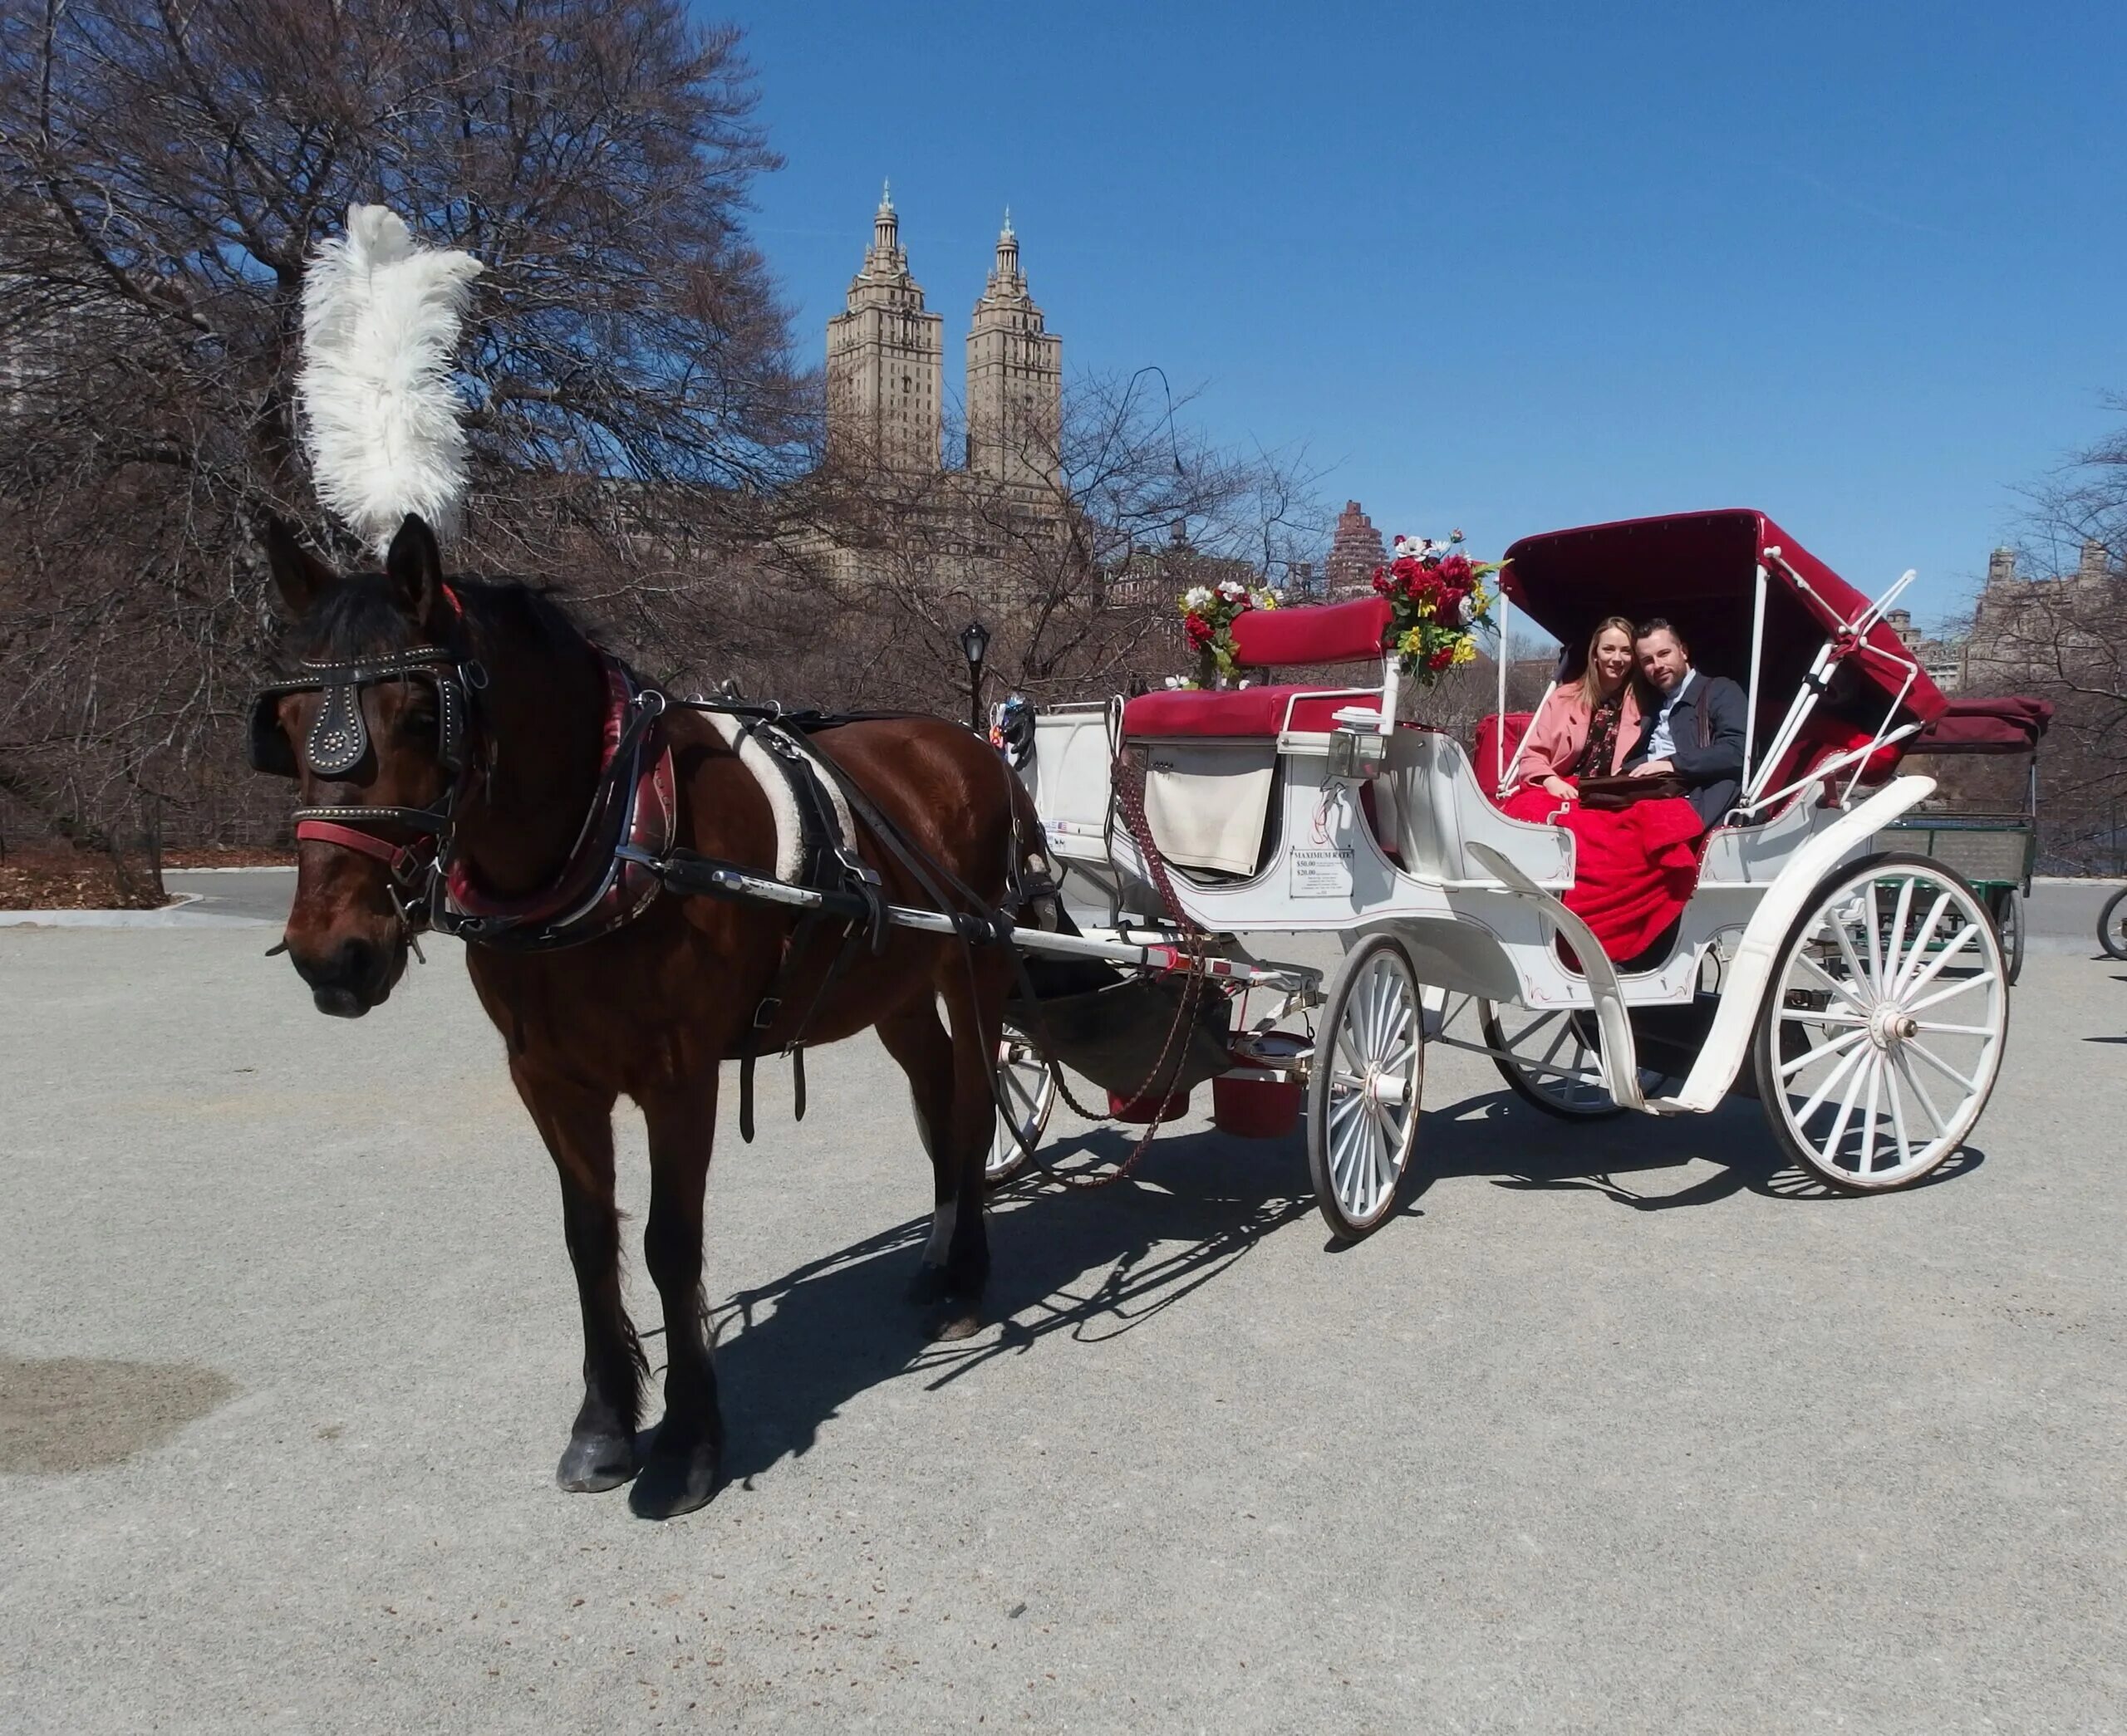 Riding round. A Horse and Carriage Ride in Central Park. Carriage Ride. Мустанг карета. Паб карета и лошадь Лондон.